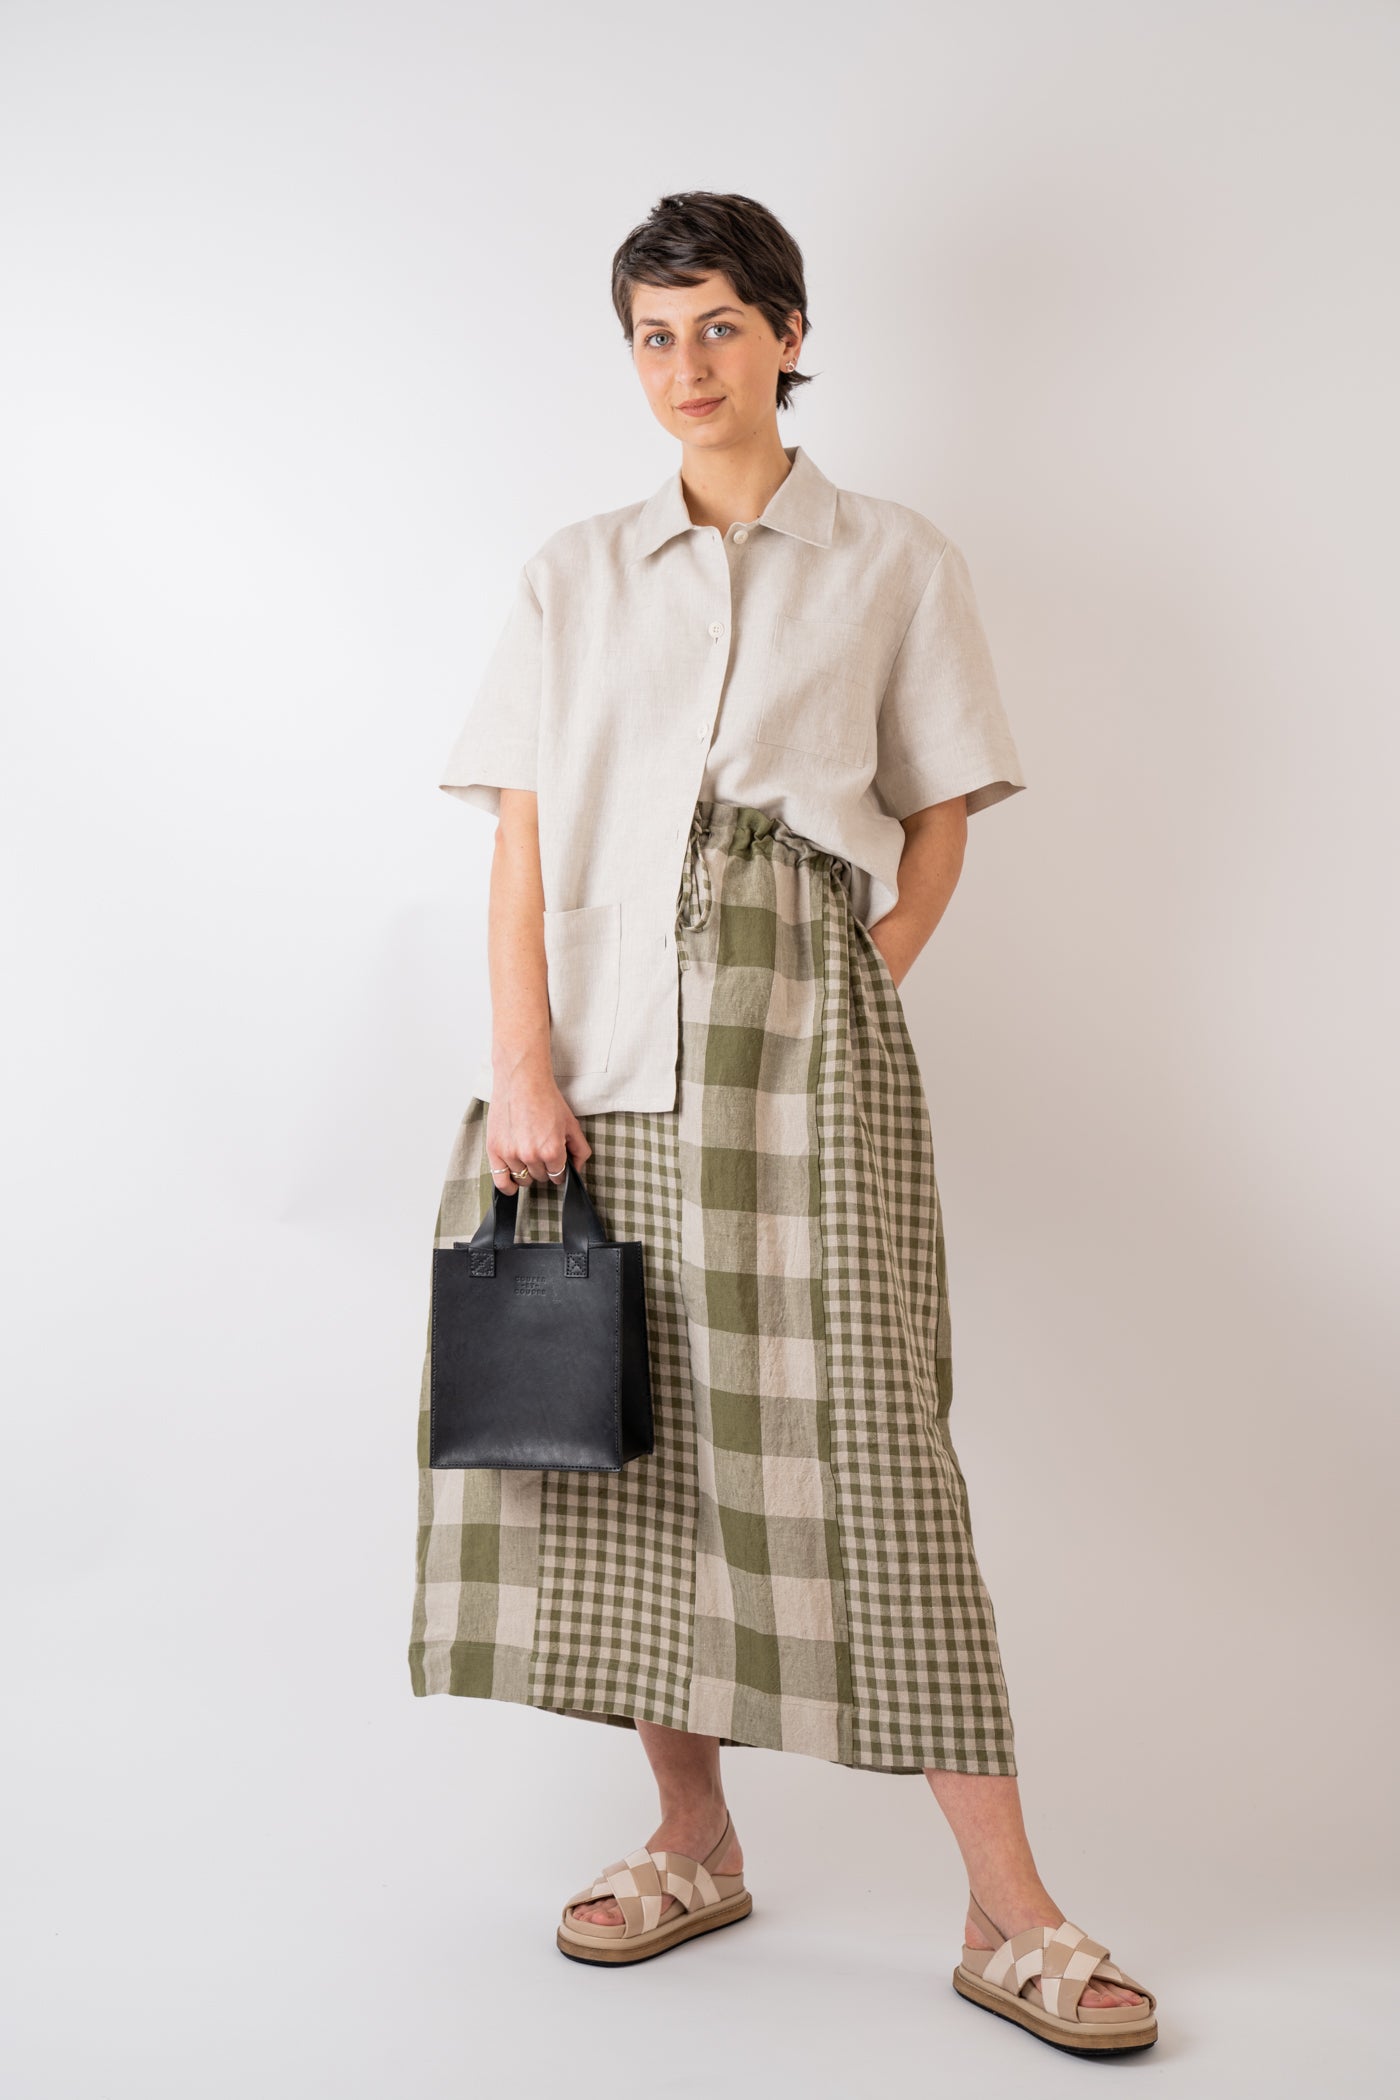 Xi Atelier Linen Cleo Shirt in Natural styled with Couper et Coudre Jour Bag in Noir and Cawley Studio Linen Gingham Joyce Skirt